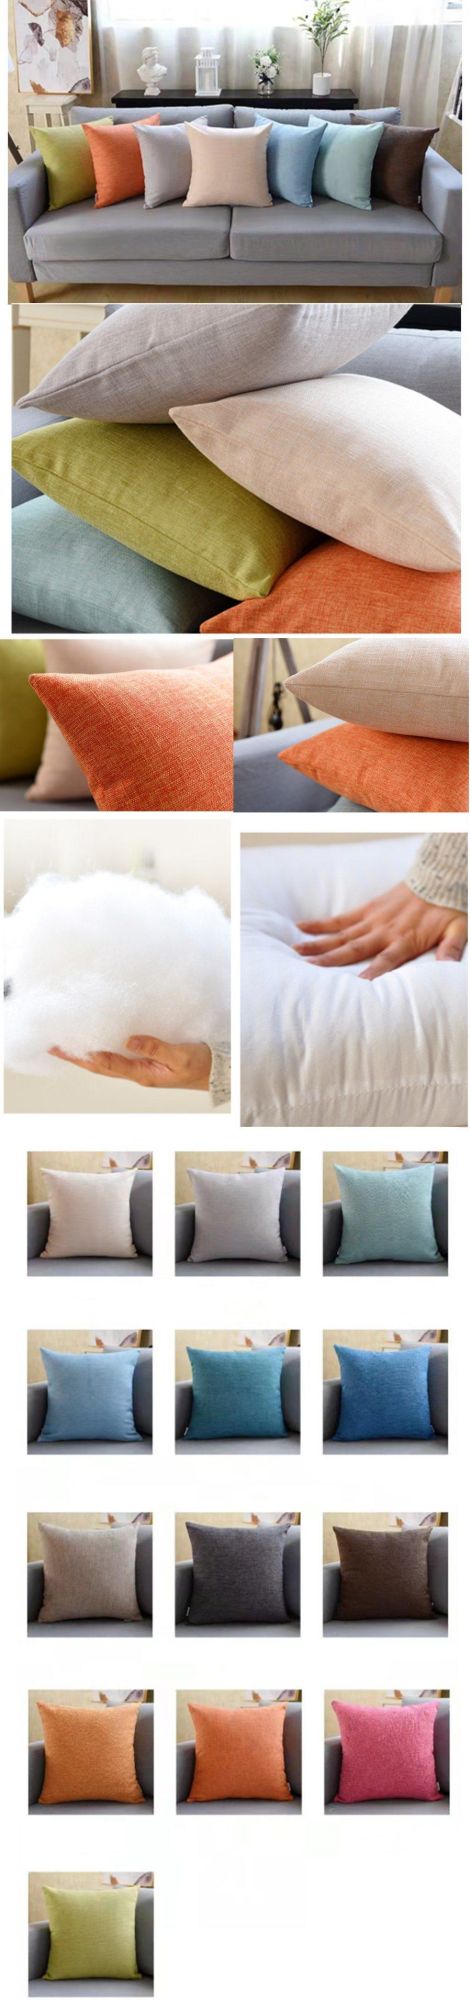 Fashion Polyester/Cotton Yarn Dyed Jacquard Cushions for Sofa, Travel, Bedding, Neck Pillow, Decorative, Hotel, Chair, Home Textile